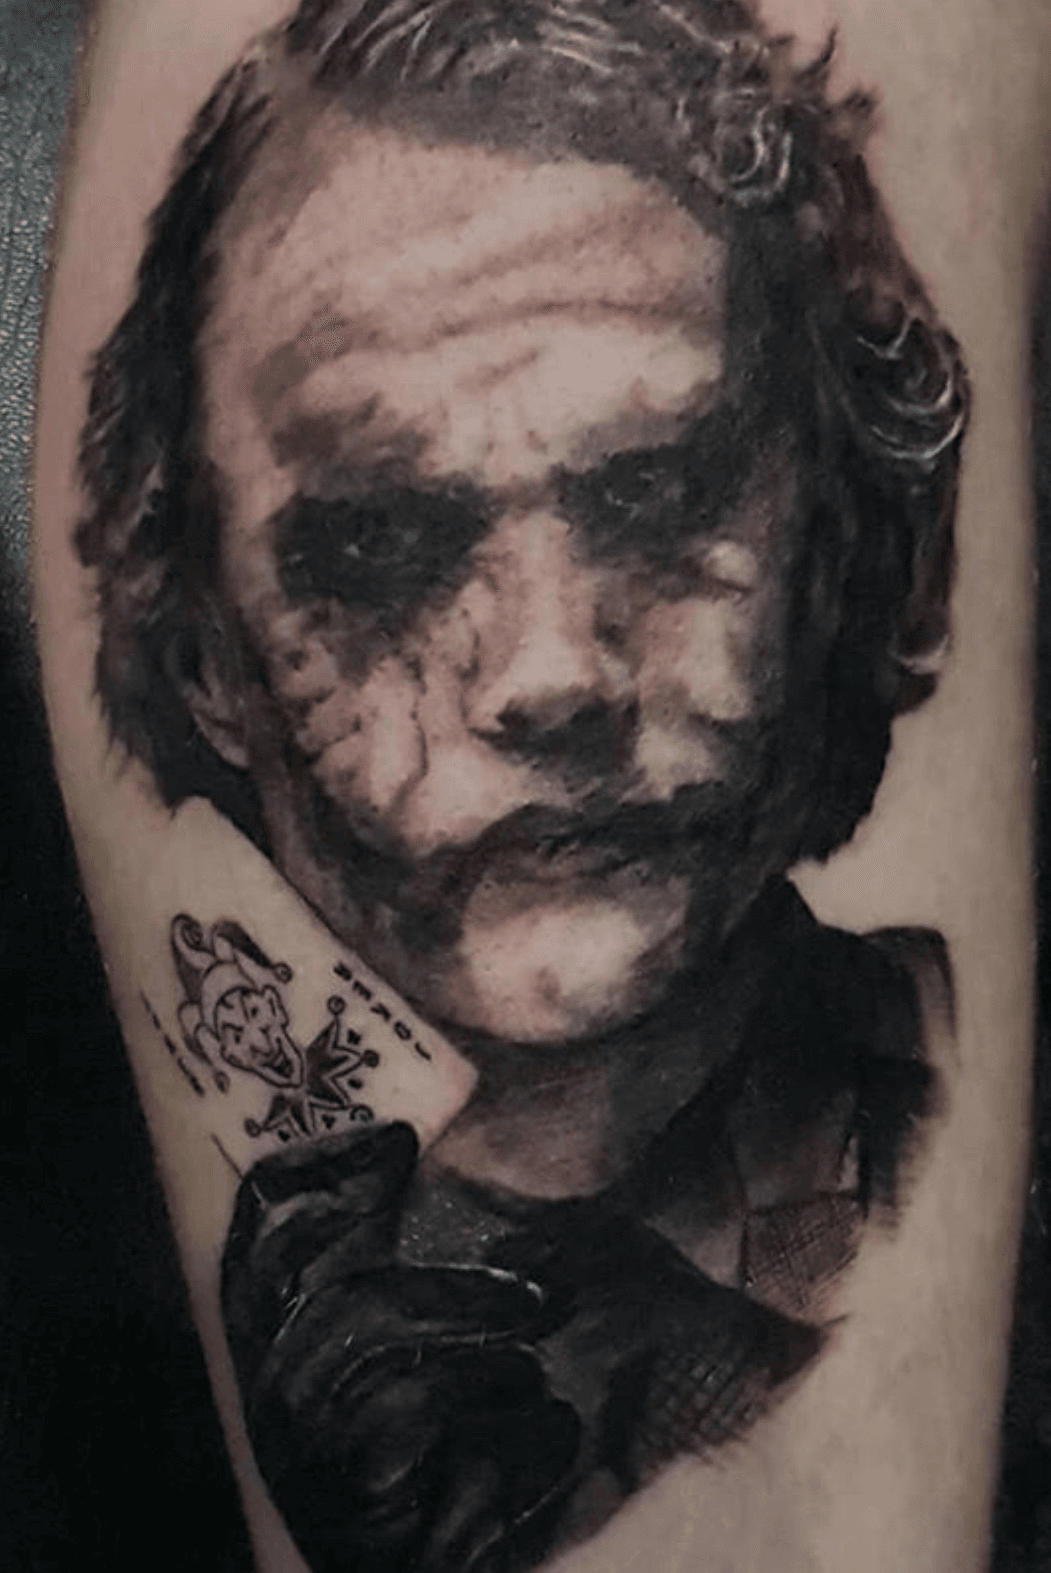 Youvegotinked Medit  Realist on the show Amazing why so serious  Joker   Tattoo by Qubi Studio youvegotinkedmedit     Facebook